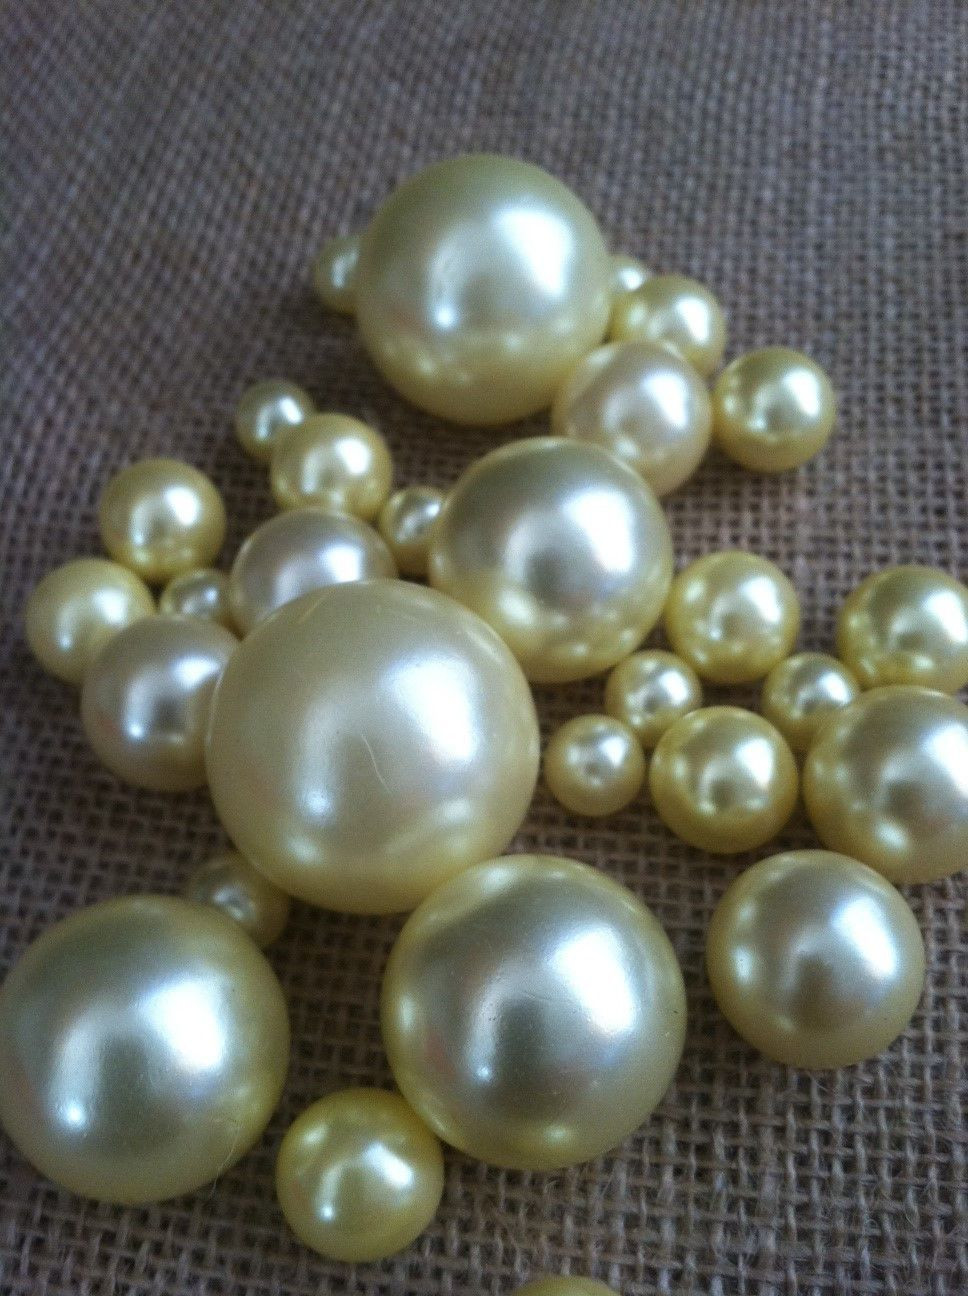 13 Cute Pearl Vase Fillers 2024 free download pearl vase fillers of light yellow pearls for floating pearl centerpieces jumbo pearls intended for light yellow pearls for floating pearl centerpieces jumbo pearls vase fillers scatters con